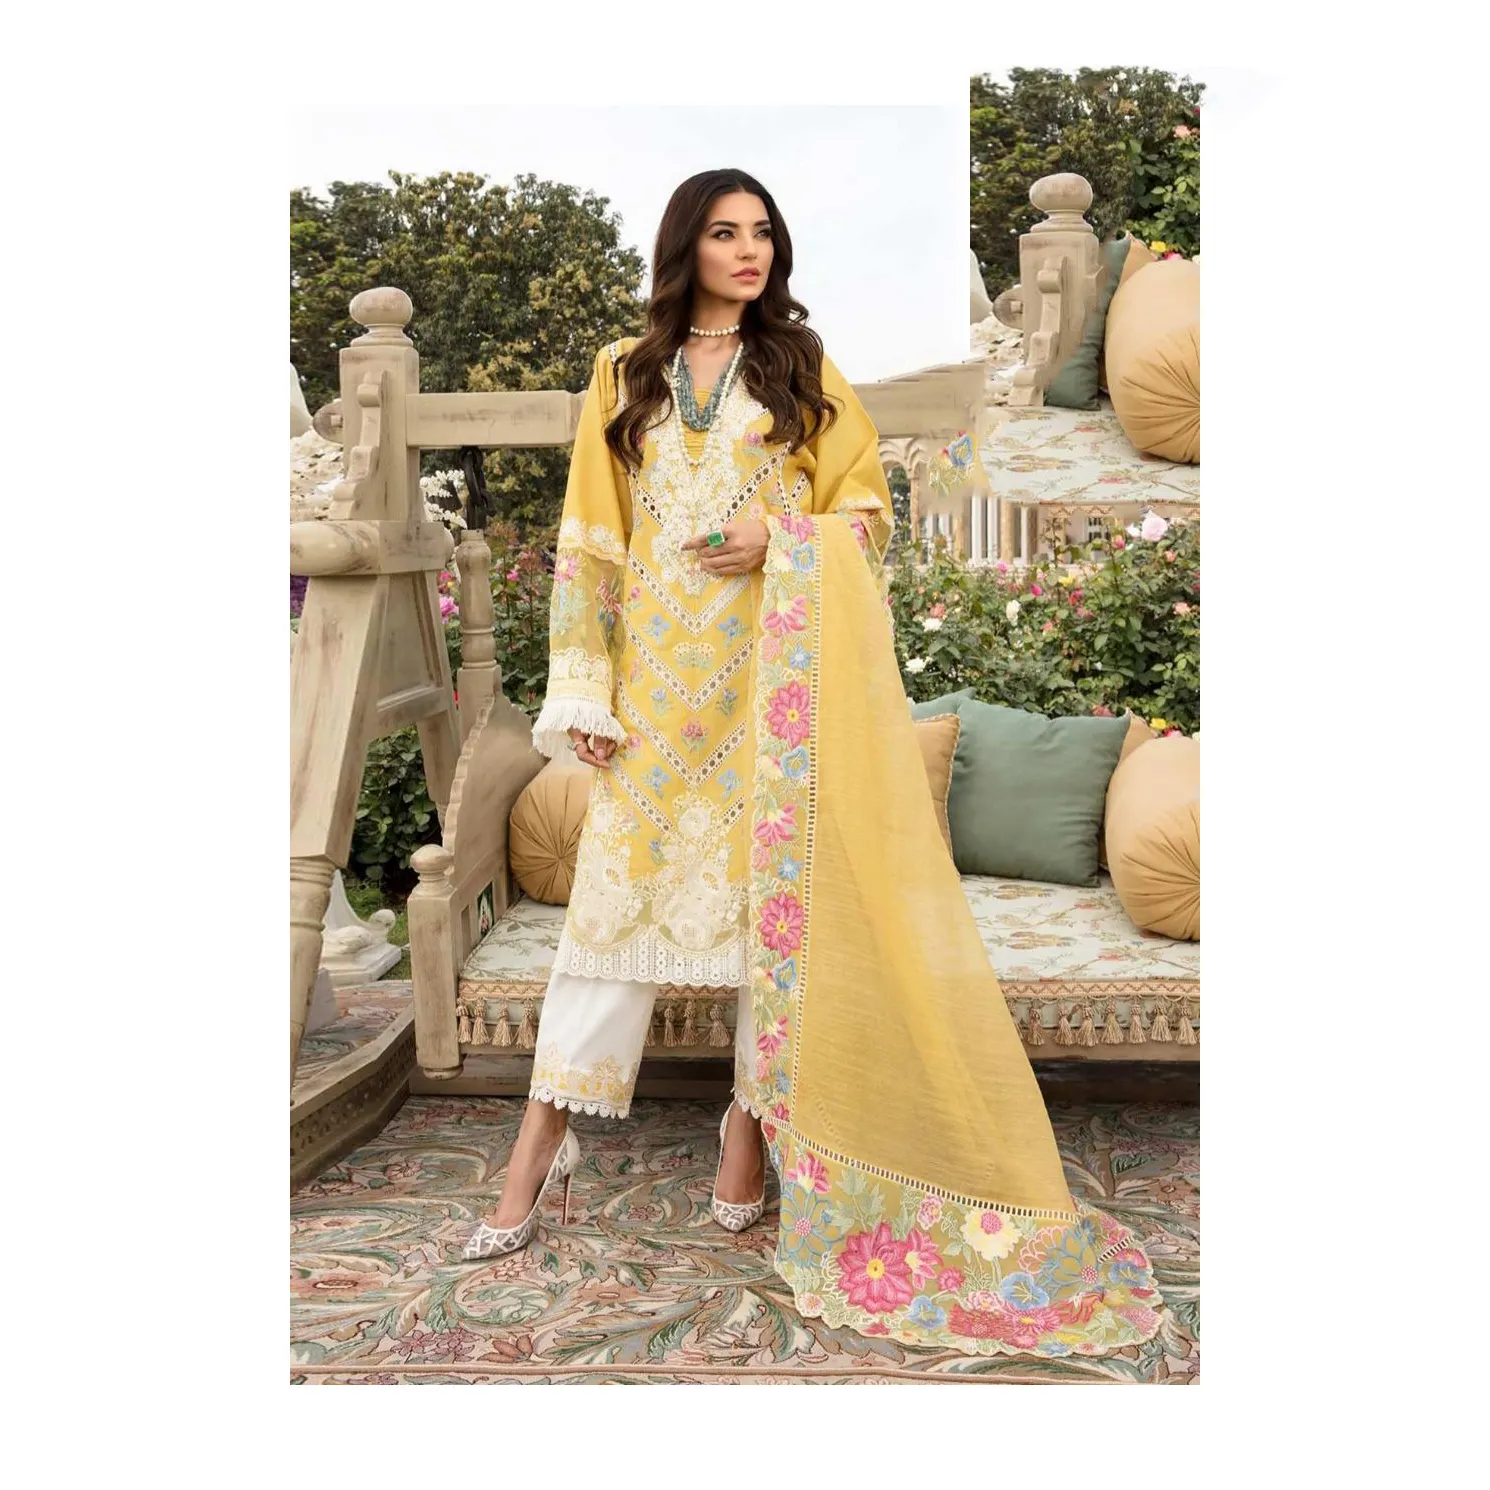 Good Looking Awesome Quality Hot Sale Pakistani Indian Shalwar Kameez Women Dress product for sale